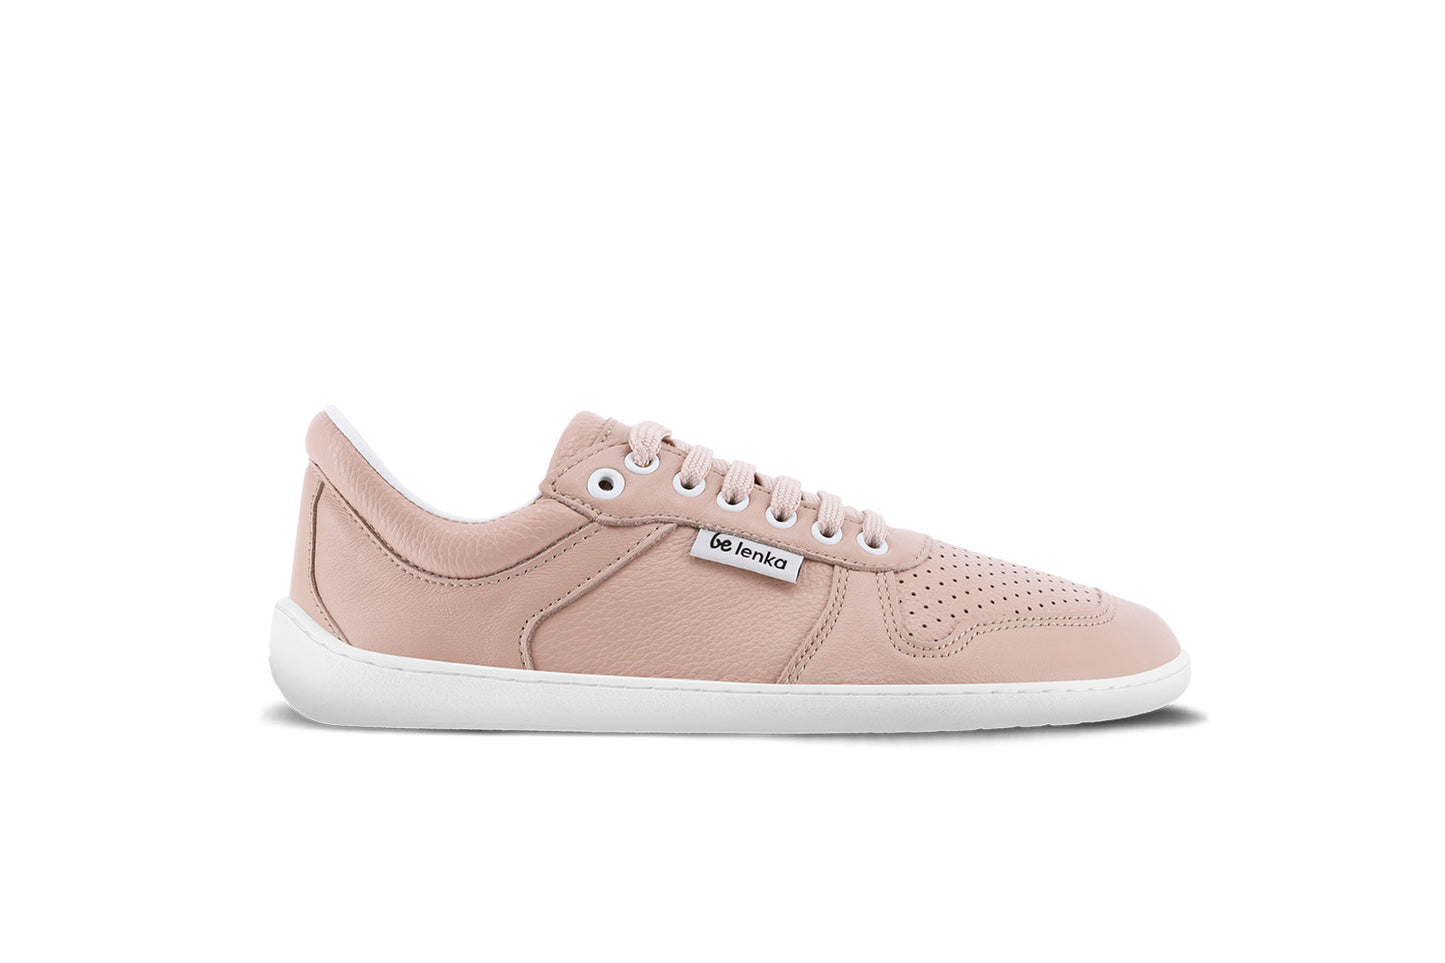 Be Lenka Champ 3.0 Barefoot Sneakers - Nude Pink